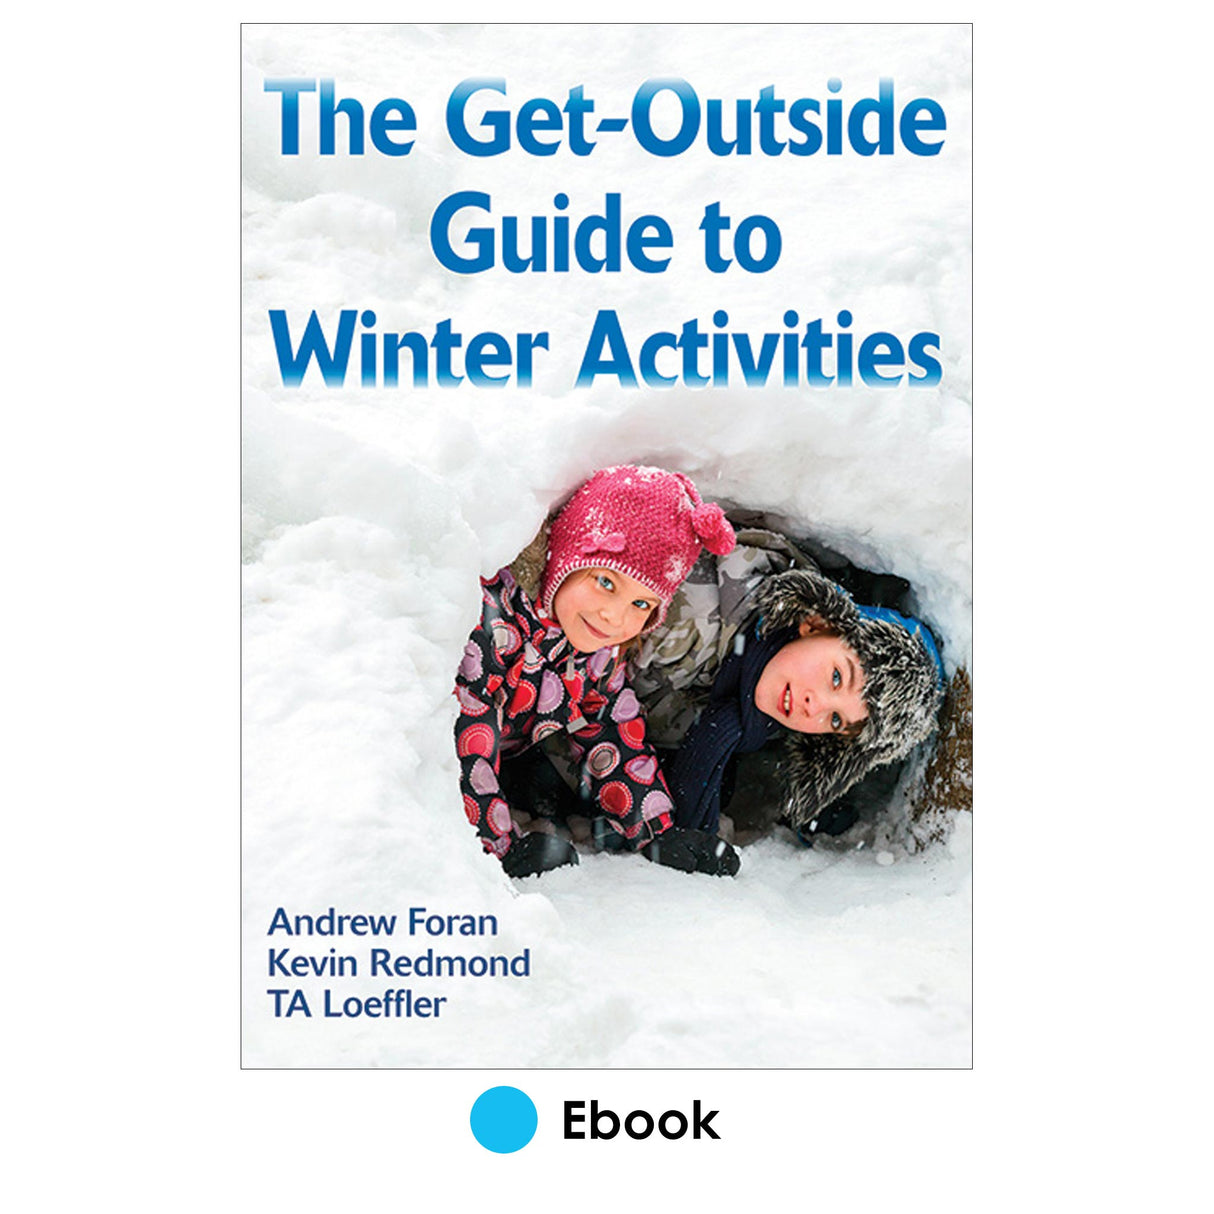 Get-Outside Guide to Winter Activities PDF, The